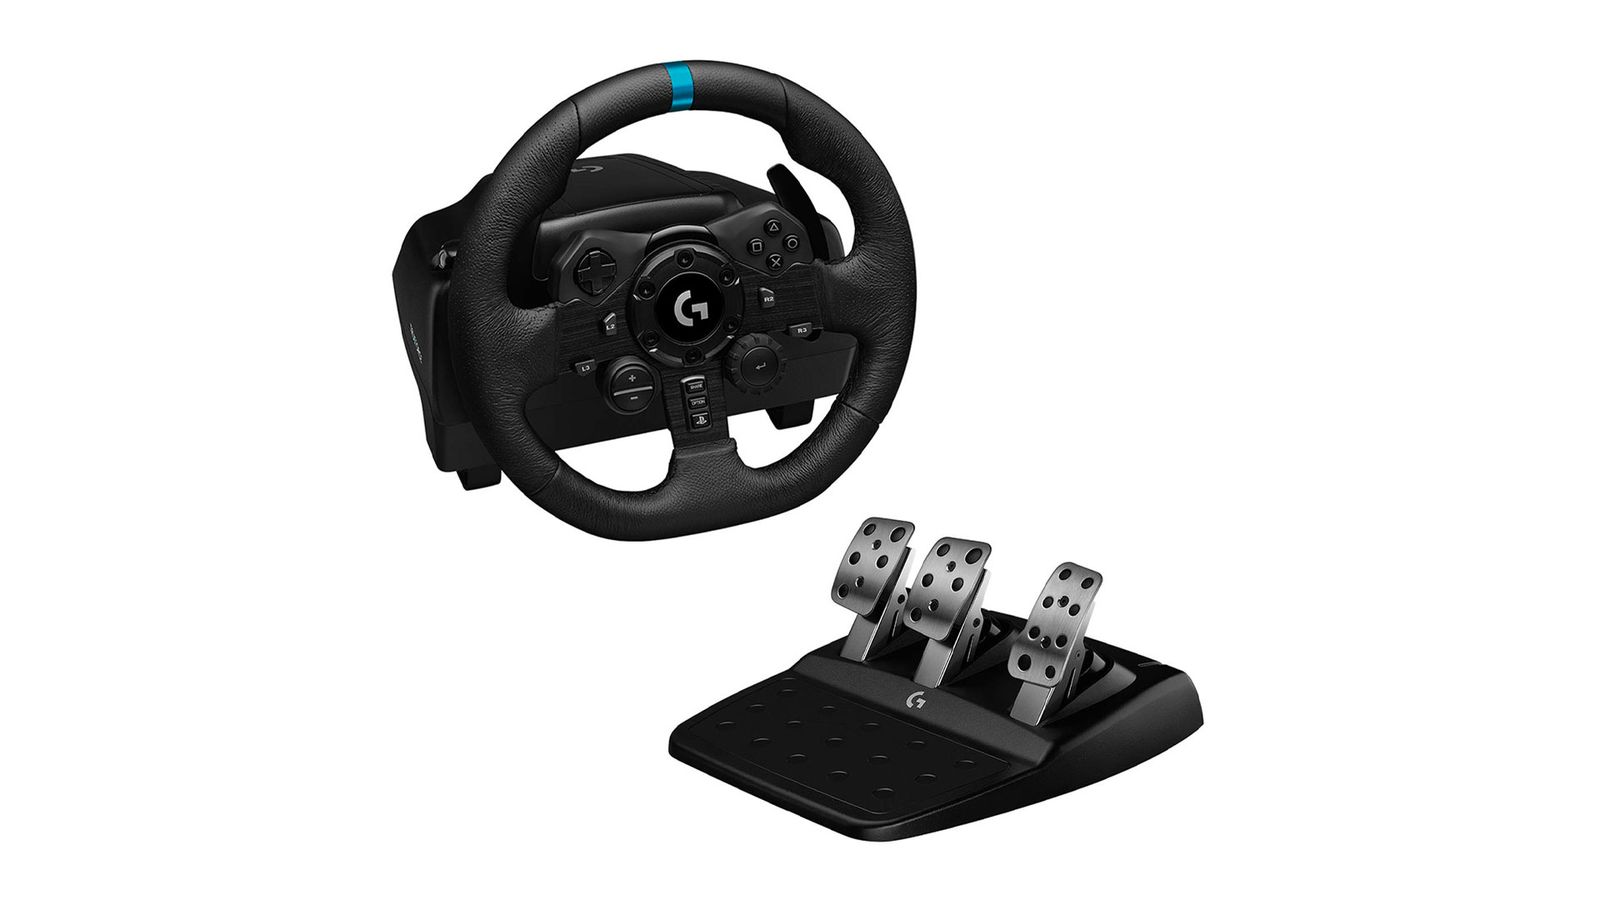 Logitech G923 Wheel and Pedal Set product image of a black sim wheel next to a set of black and silver pedals.